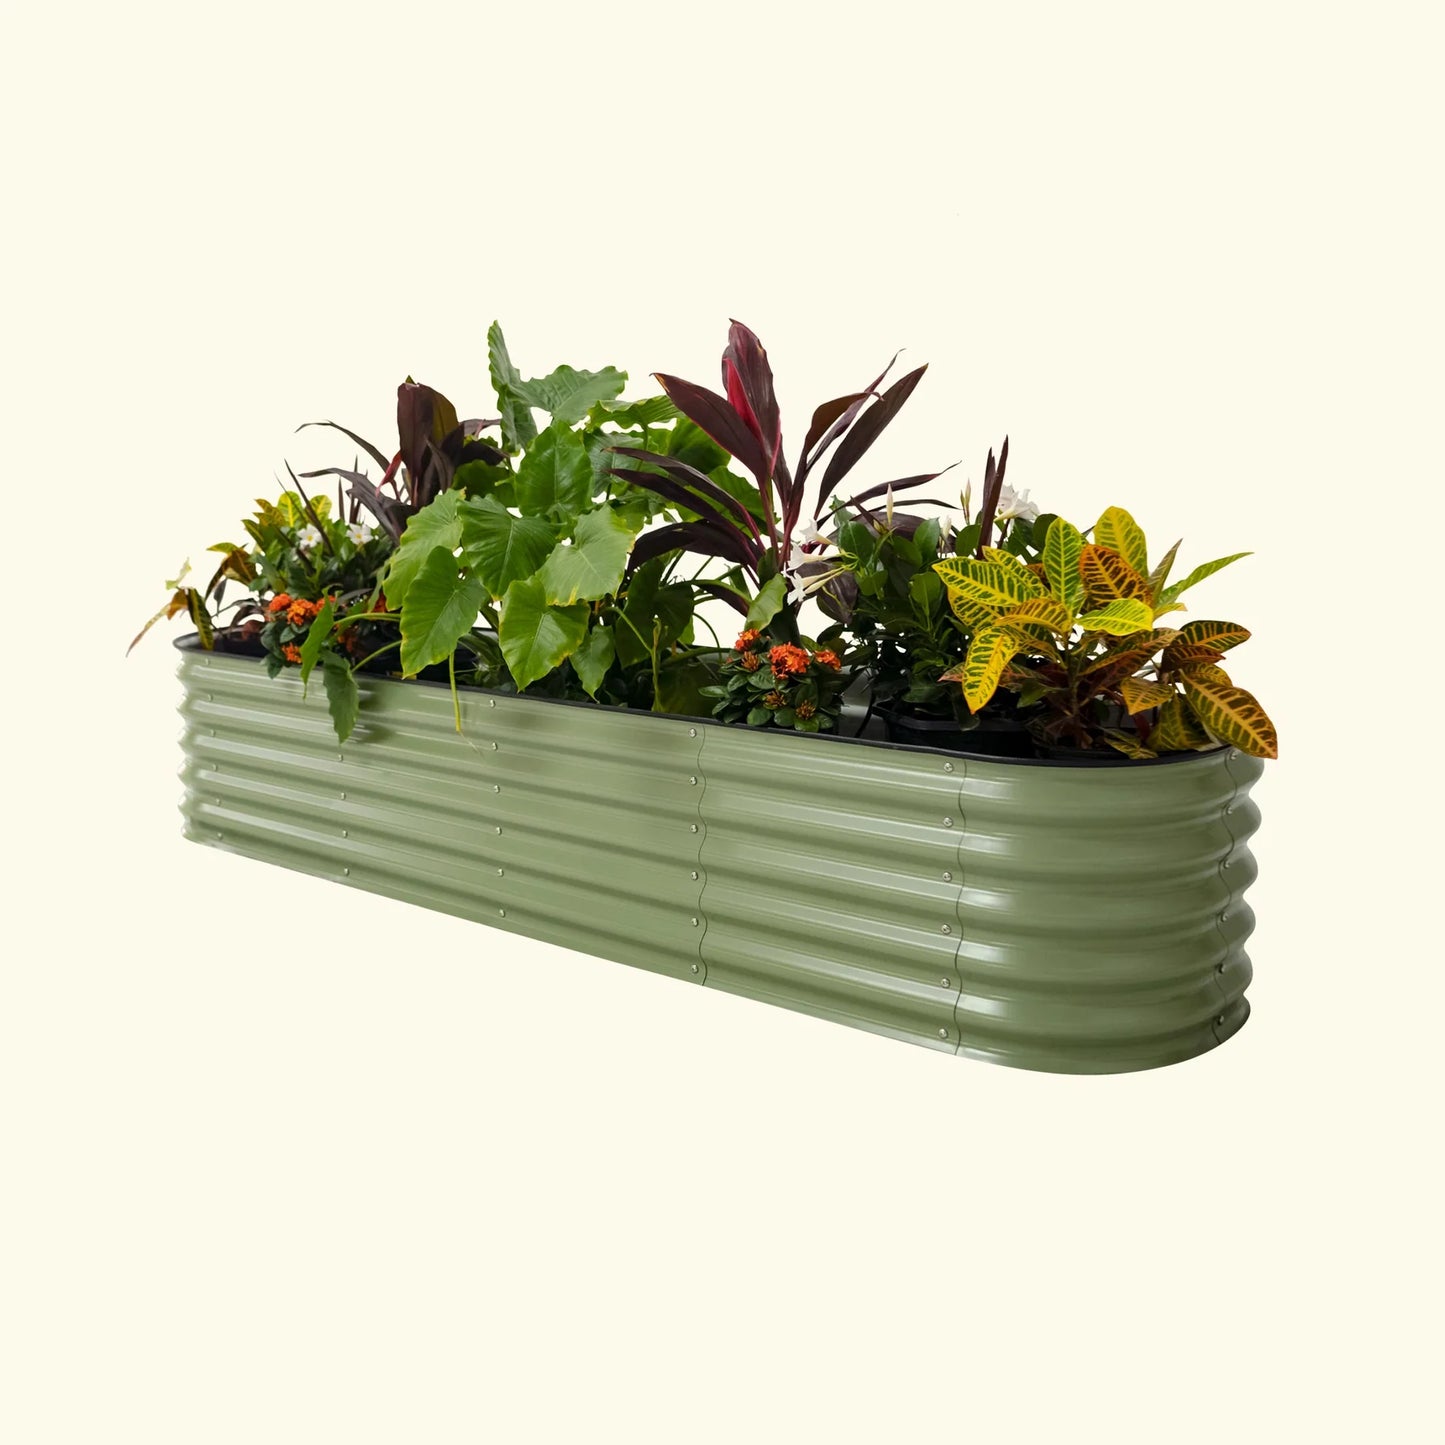 17" Tall 9 In 1 Modular Metal Raised Garden Bed Kit in Olive Green